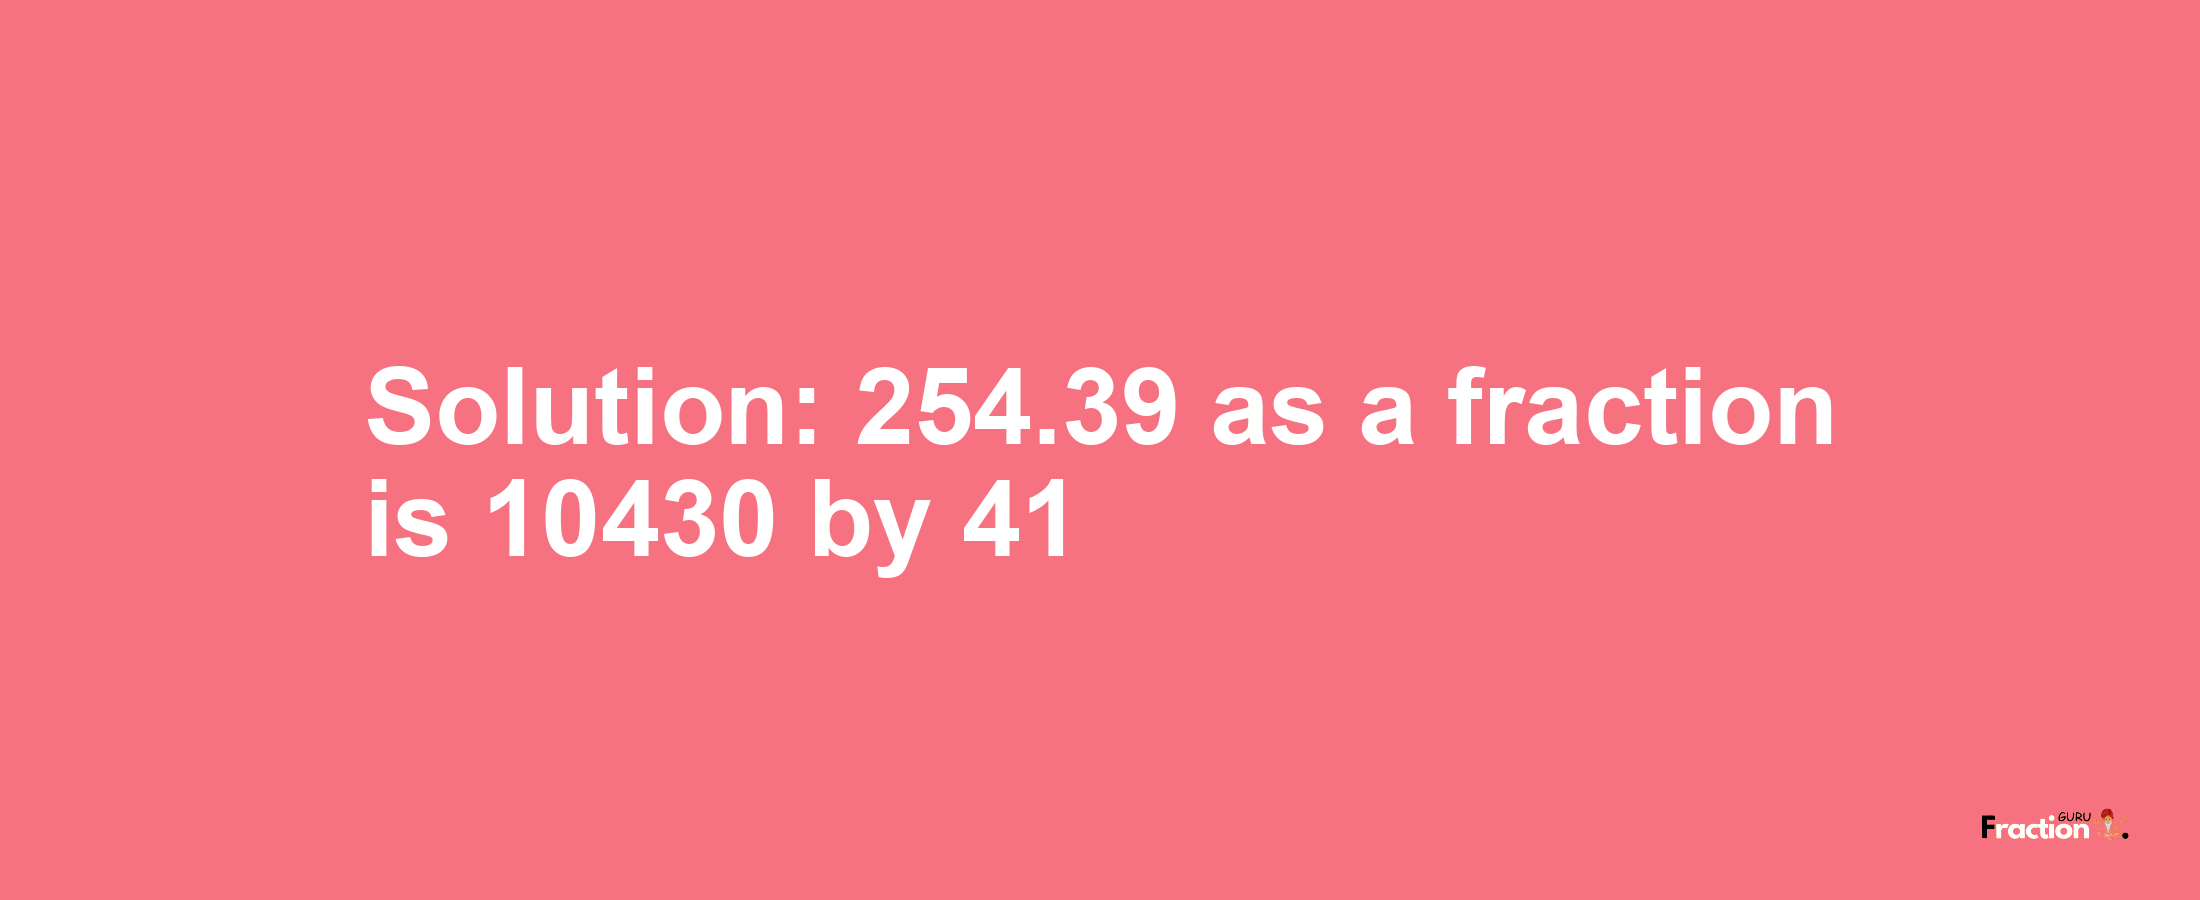 Solution:254.39 as a fraction is 10430/41